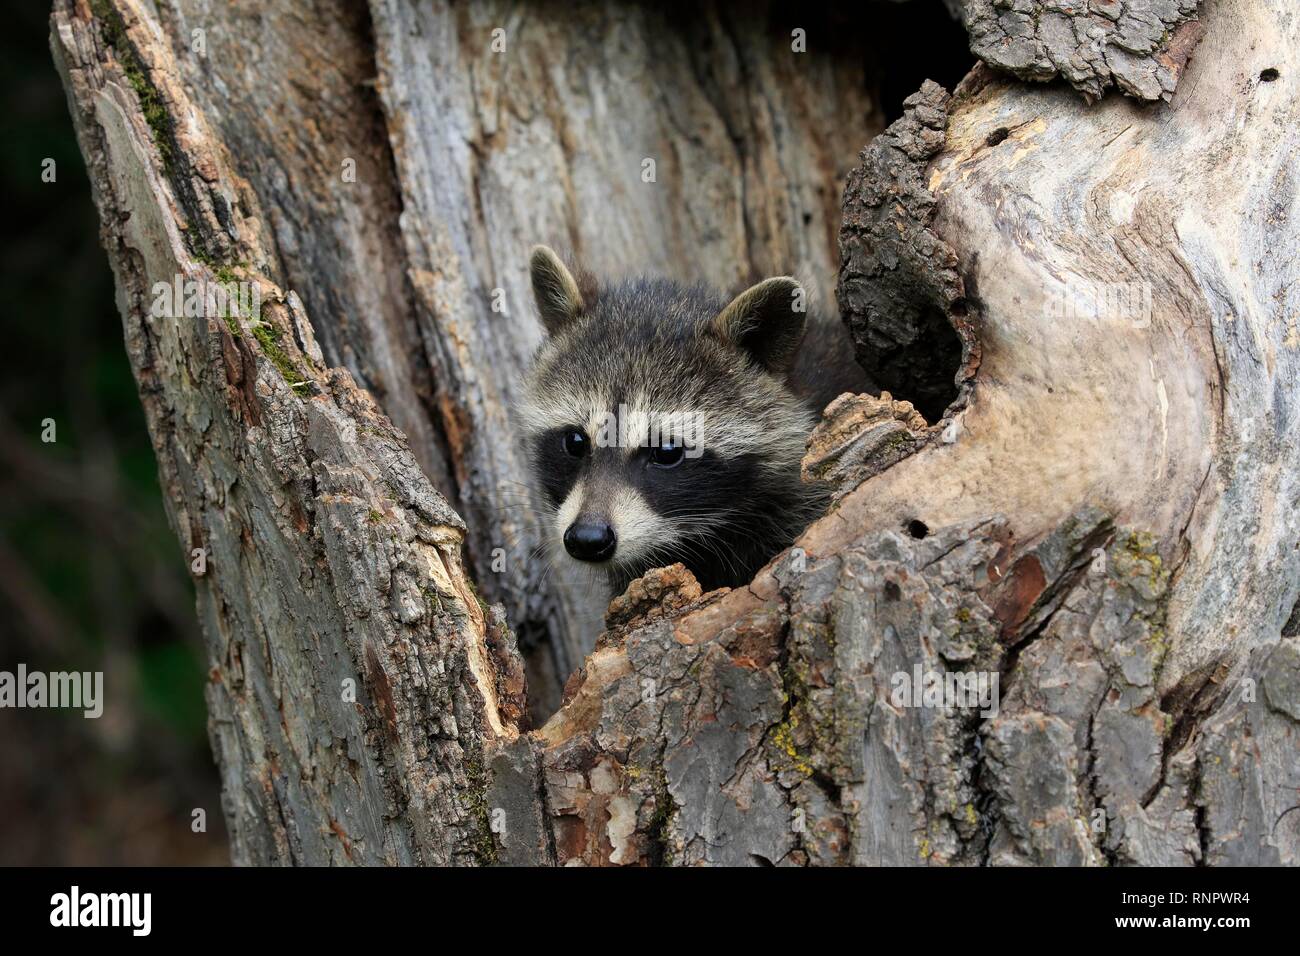 American Raccoon (Procyon lotor), young animal looking curiously out of tree hole, Pine County, Minnesota, USA Stock Photo